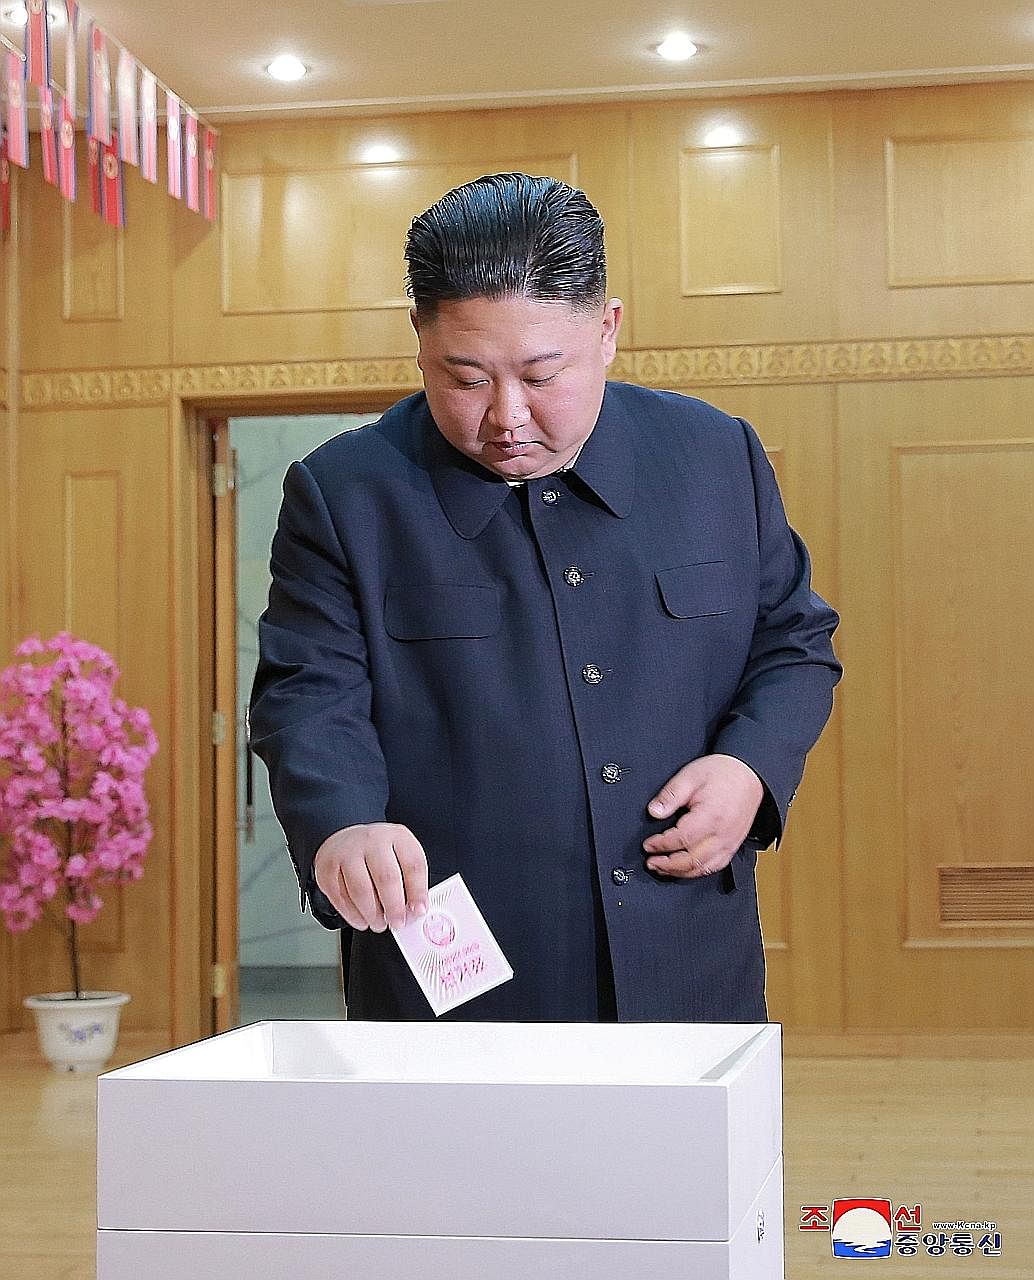 North Korean leader Kim Jong Un casting his vote in the election for the Supreme People's Assembly. With a total absence of electoral competition, analysts say the election is held largely as a political rite to enable the authorities to claim a mand